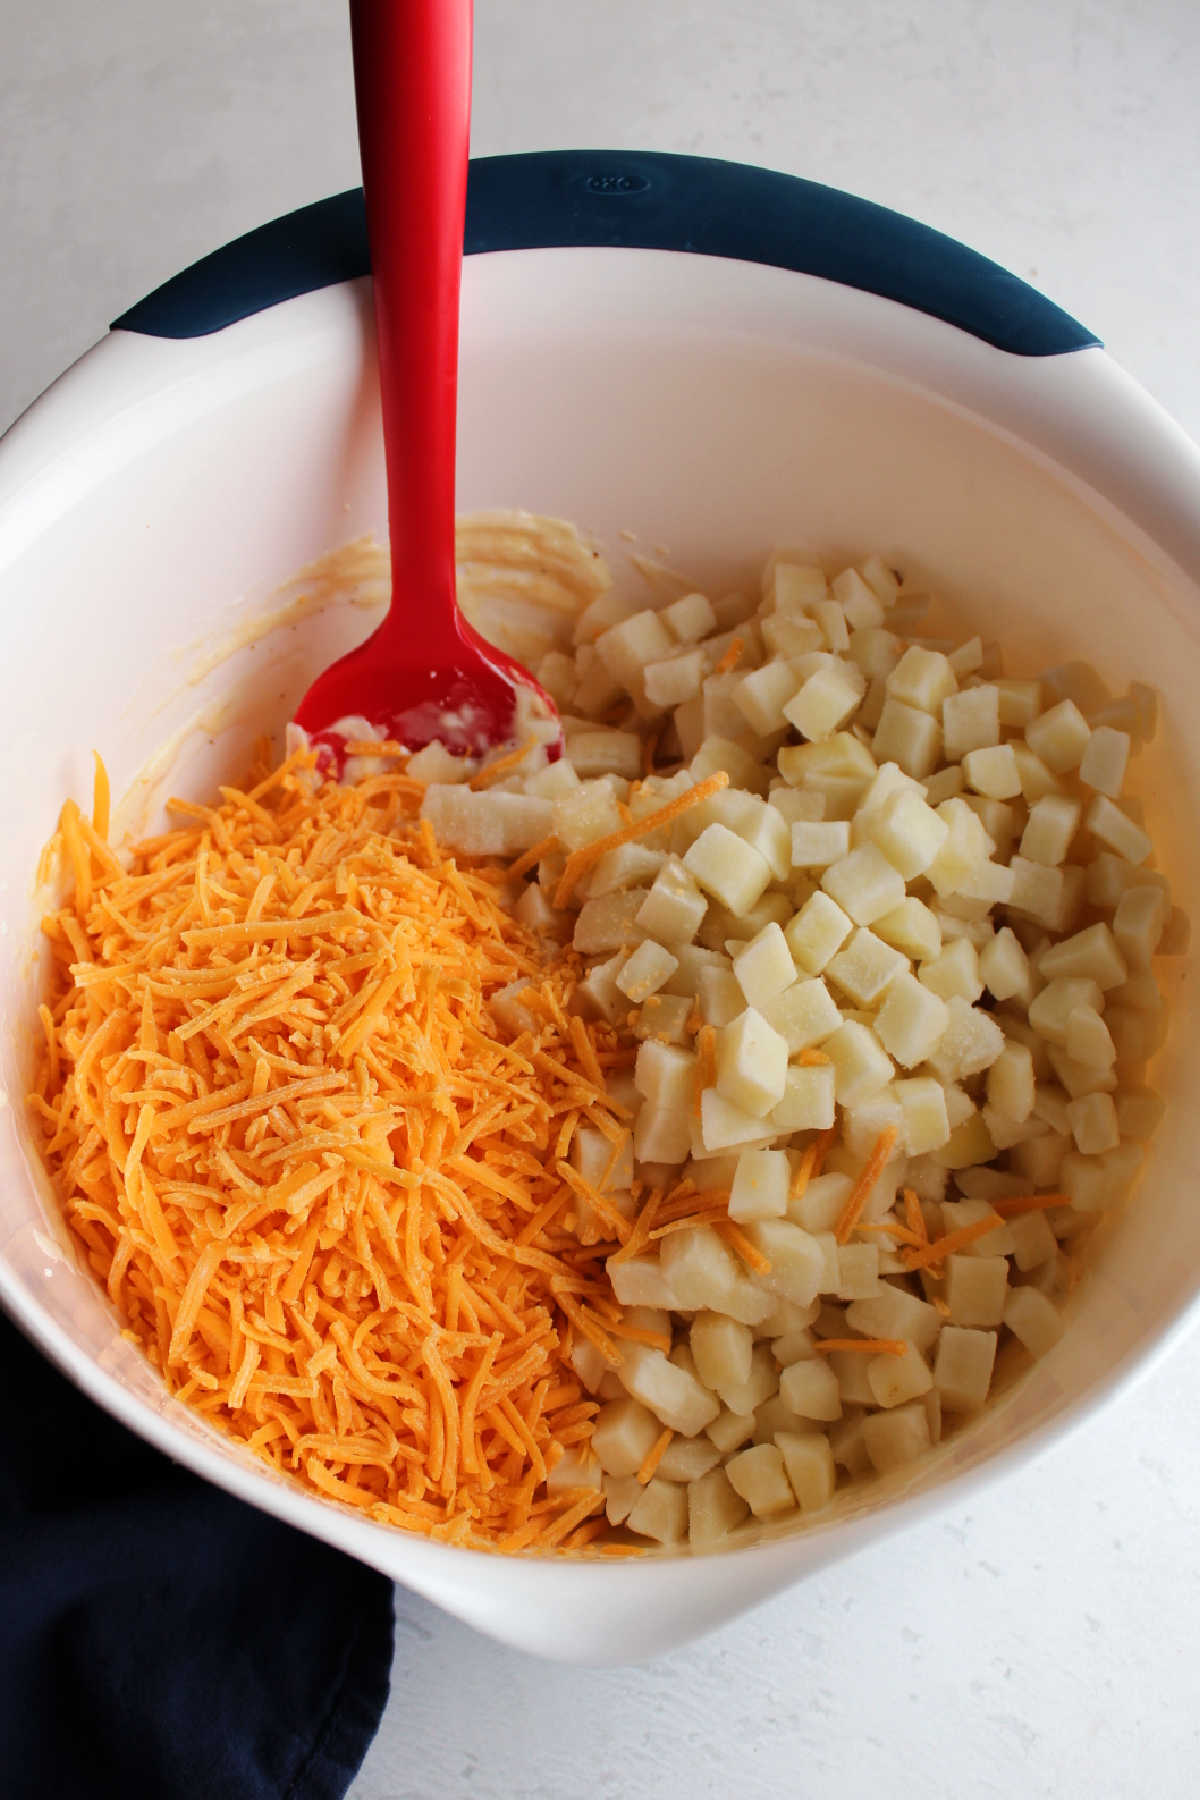 Shredded cheddar and cubes of potato in bowl with ranch mixture.